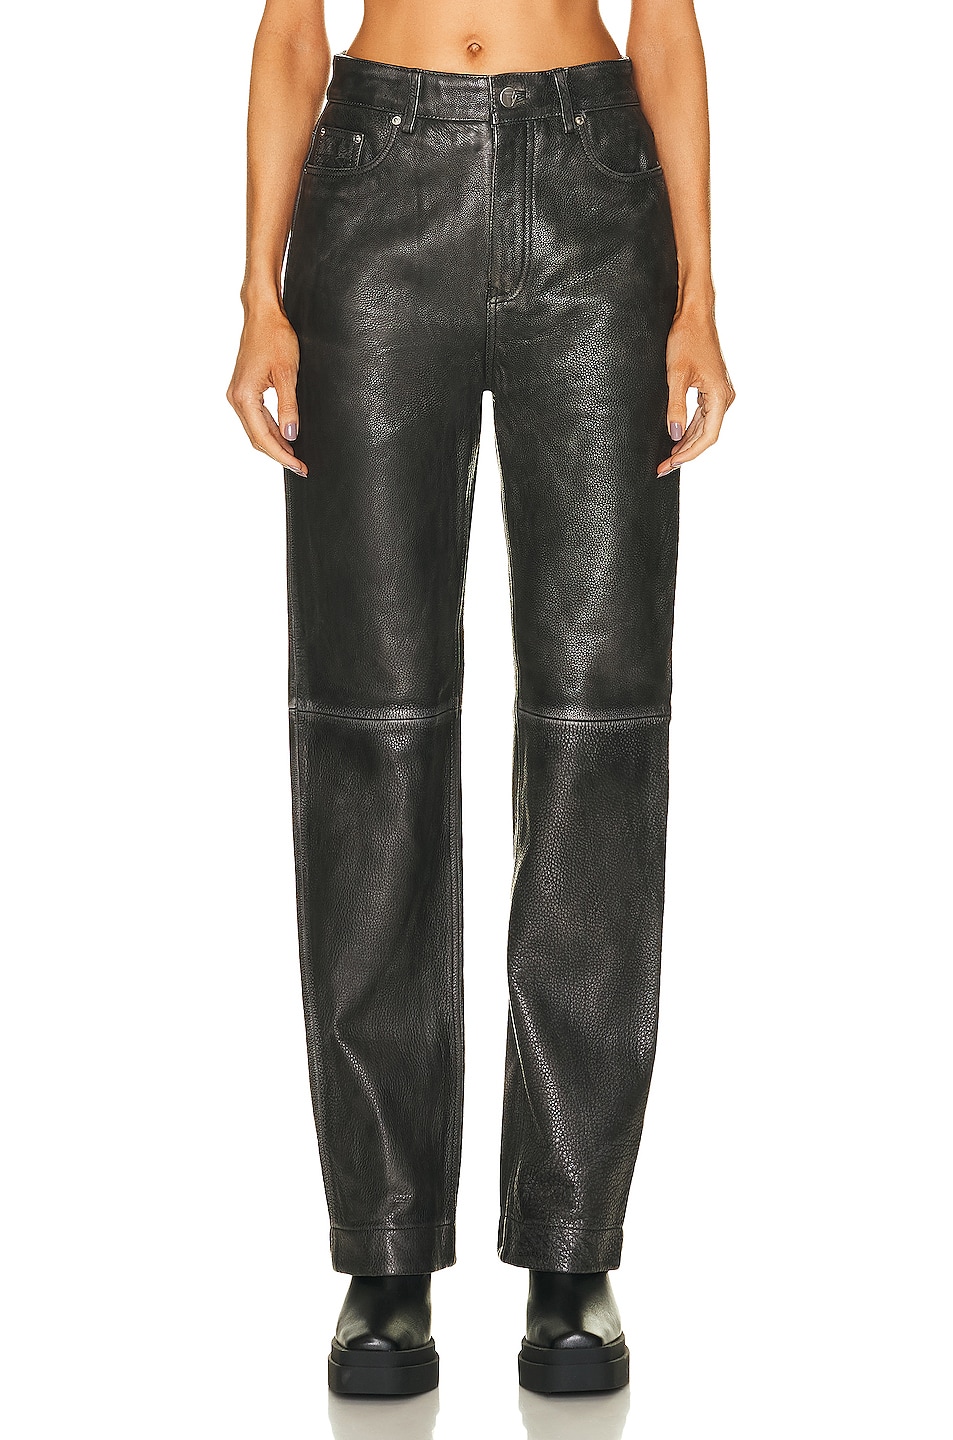 REMAIN Washed Leather Pant in Black | FWRD